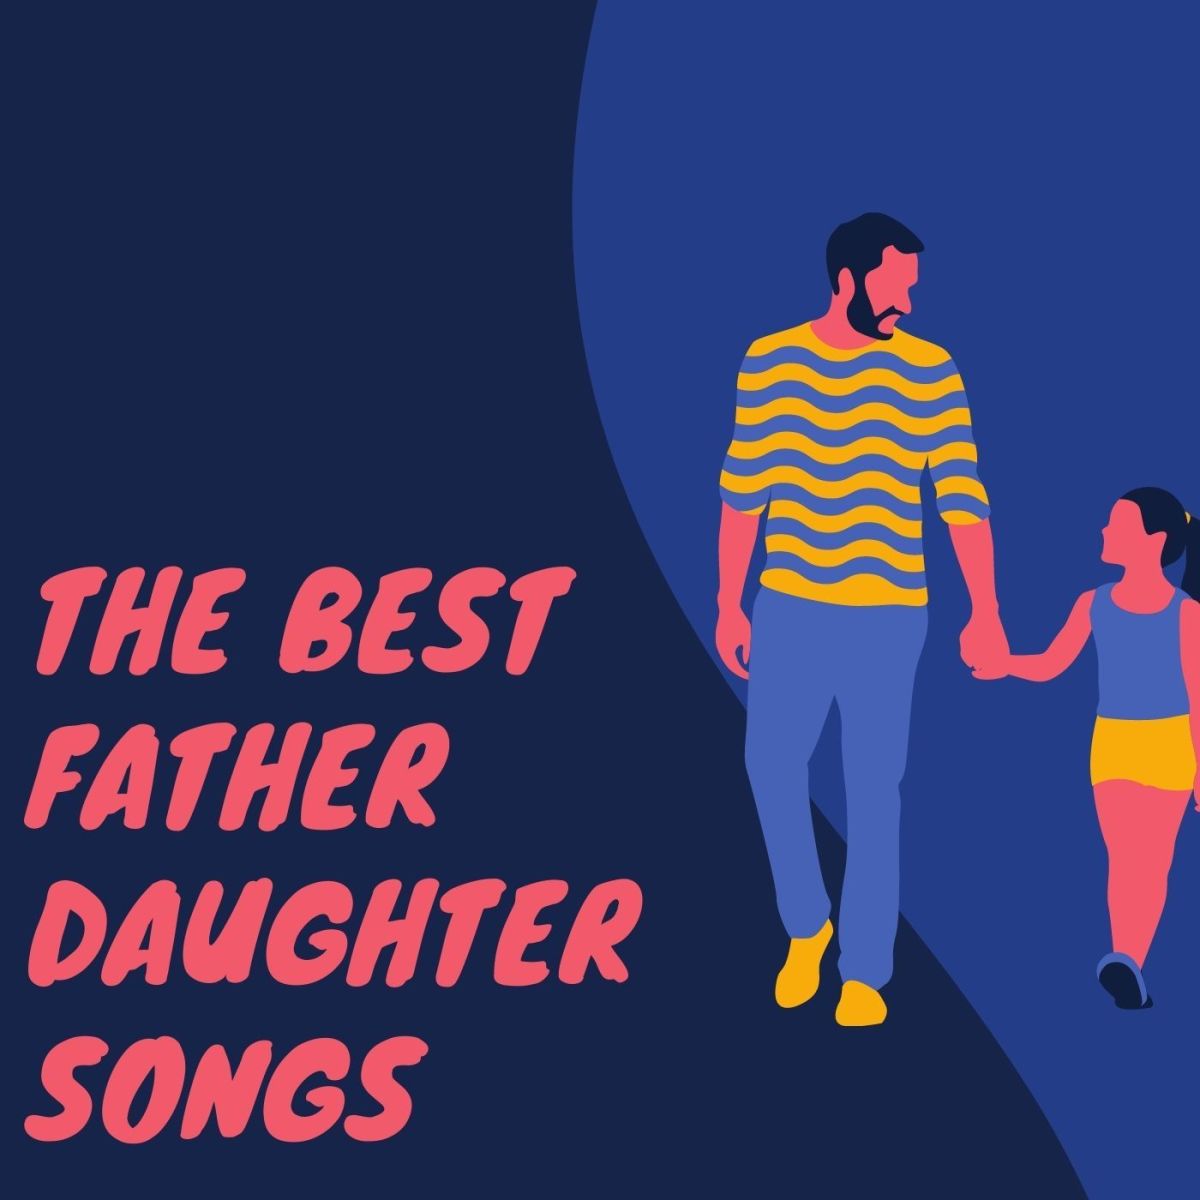 10 Best Father Daughter Songs